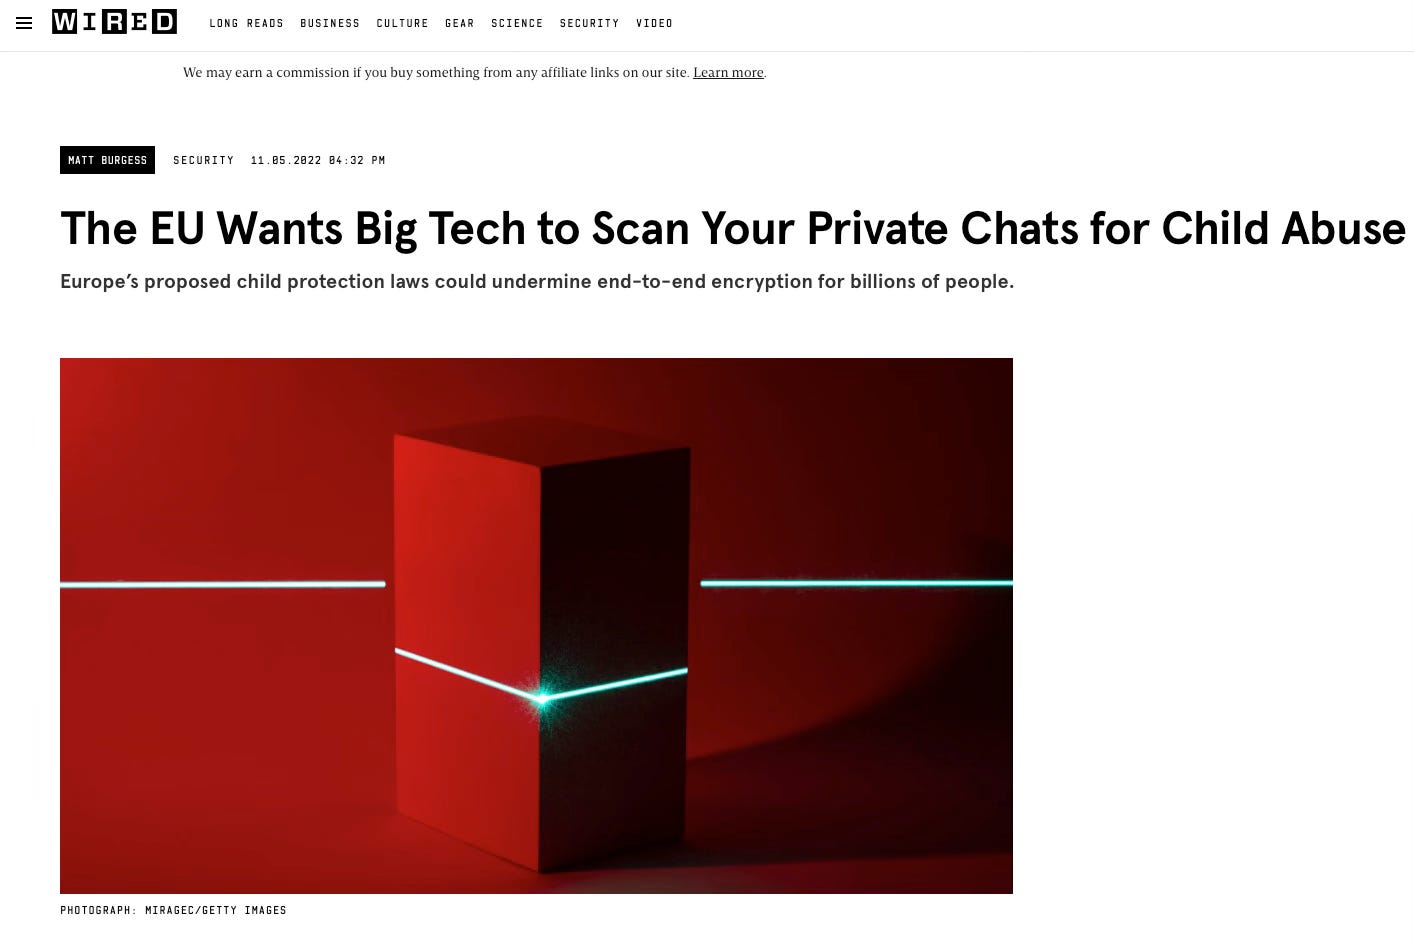 https://www.wired.co.uk/article/europe-csam-scanning-law-chat-encryption